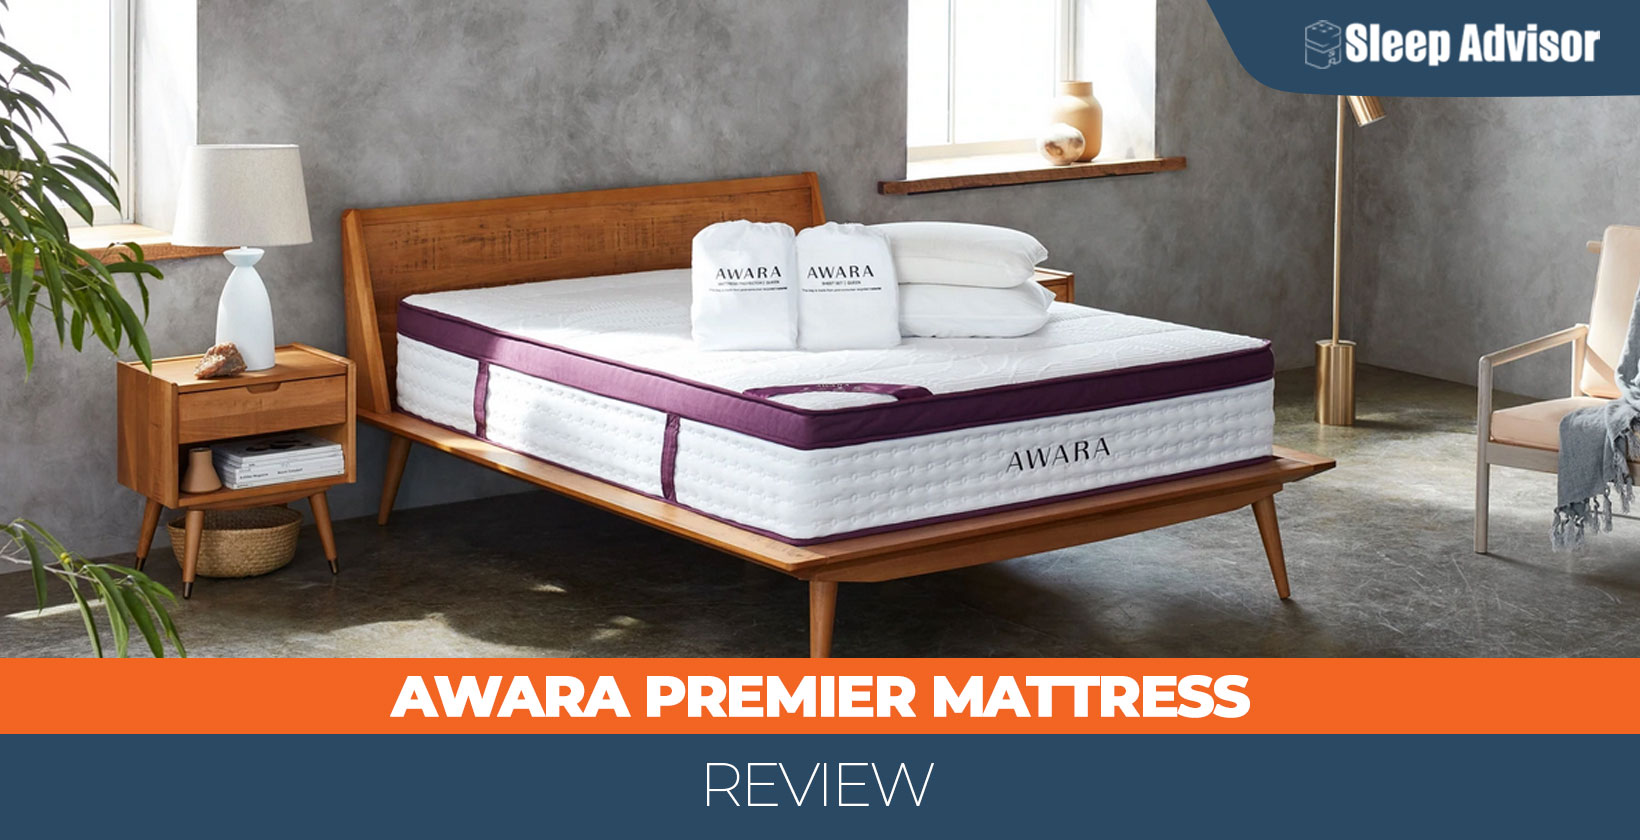 Awara Premier Review and Prices